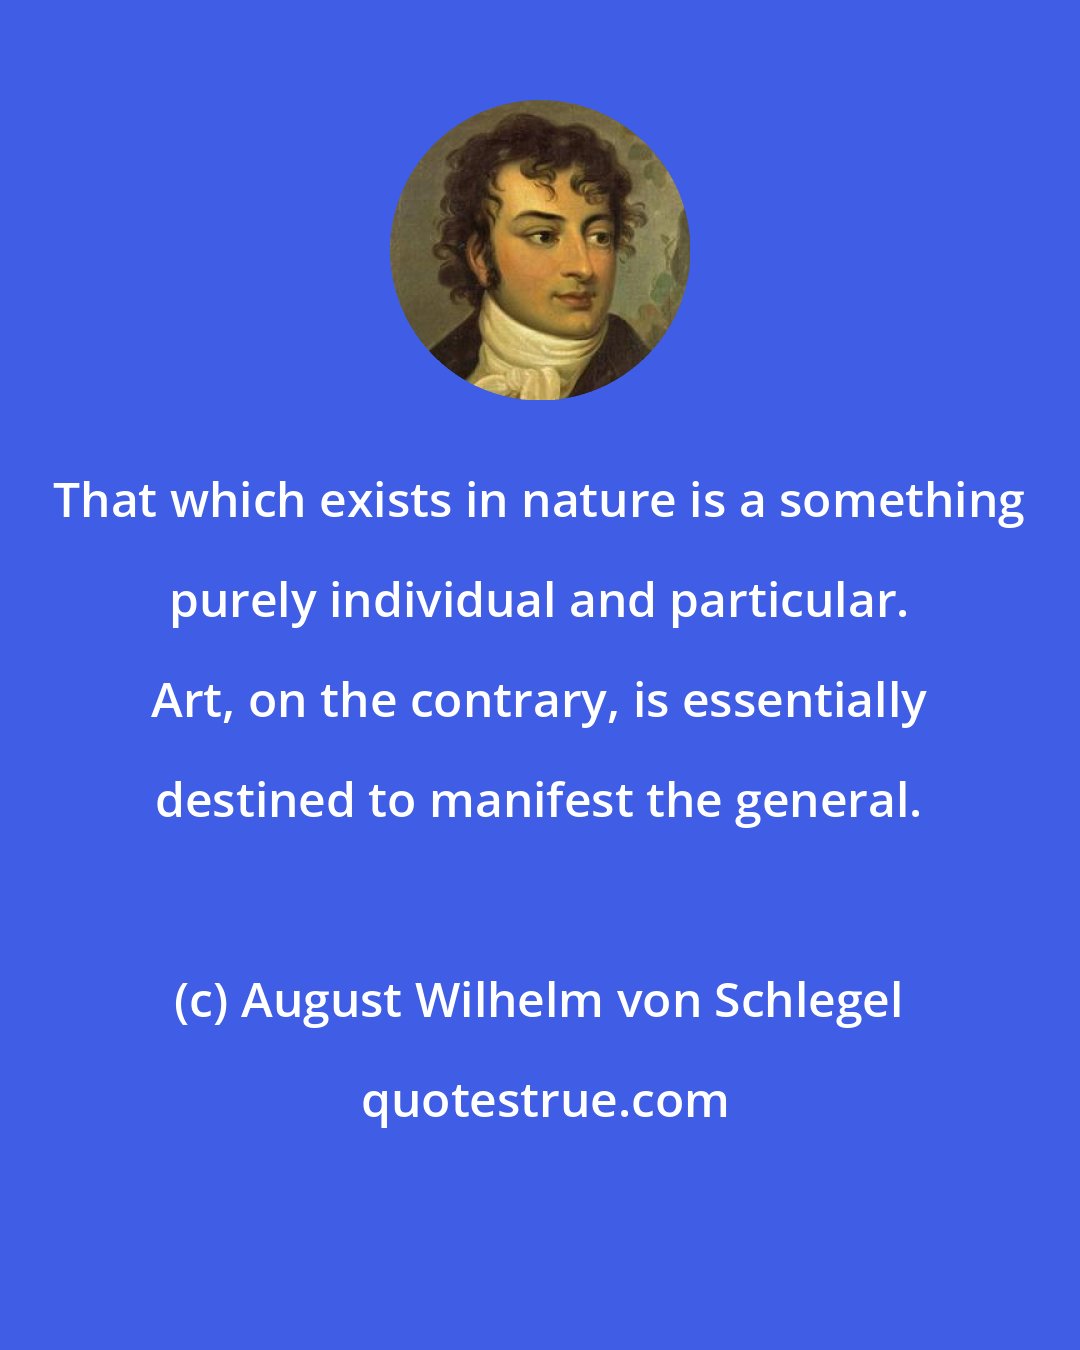 August Wilhelm von Schlegel: That which exists in nature is a something purely individual and particular. Art, on the contrary, is essentially destined to manifest the general.